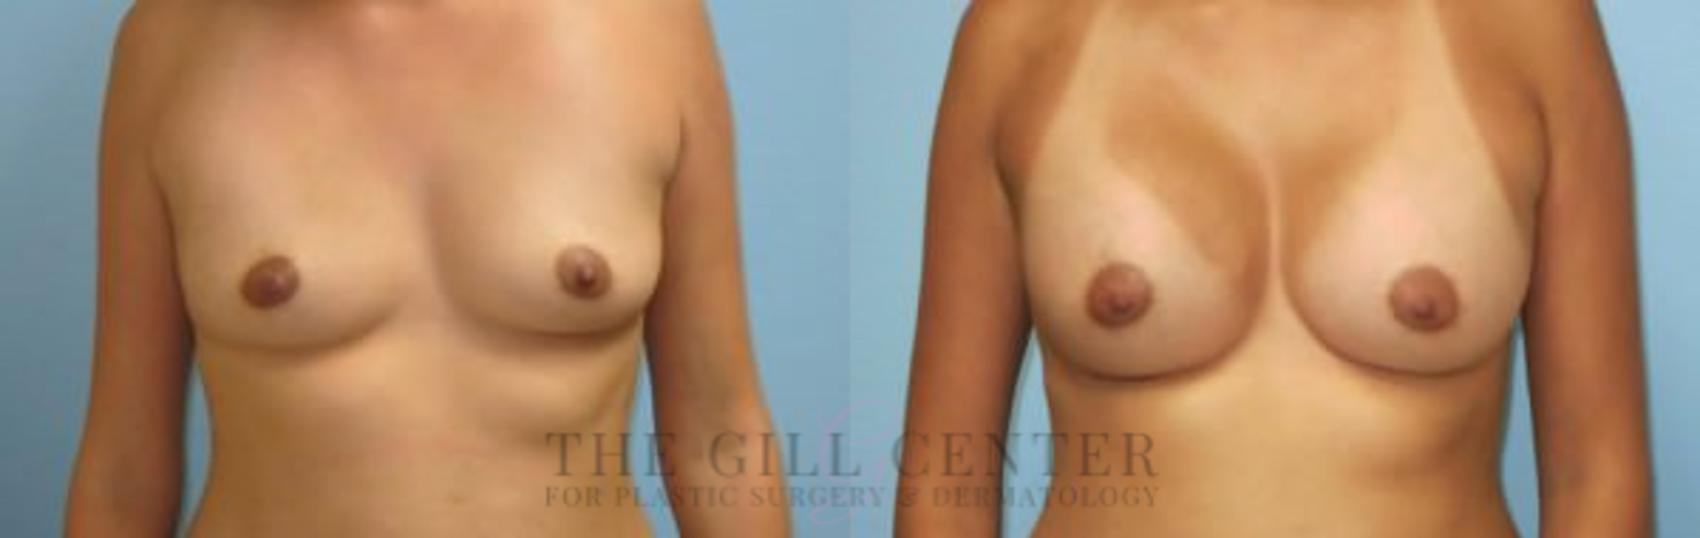 Breast Augmentation Case 49 Before & After Front | The Woodlands, TX | The Gill Center for Plastic Surgery and Dermatology